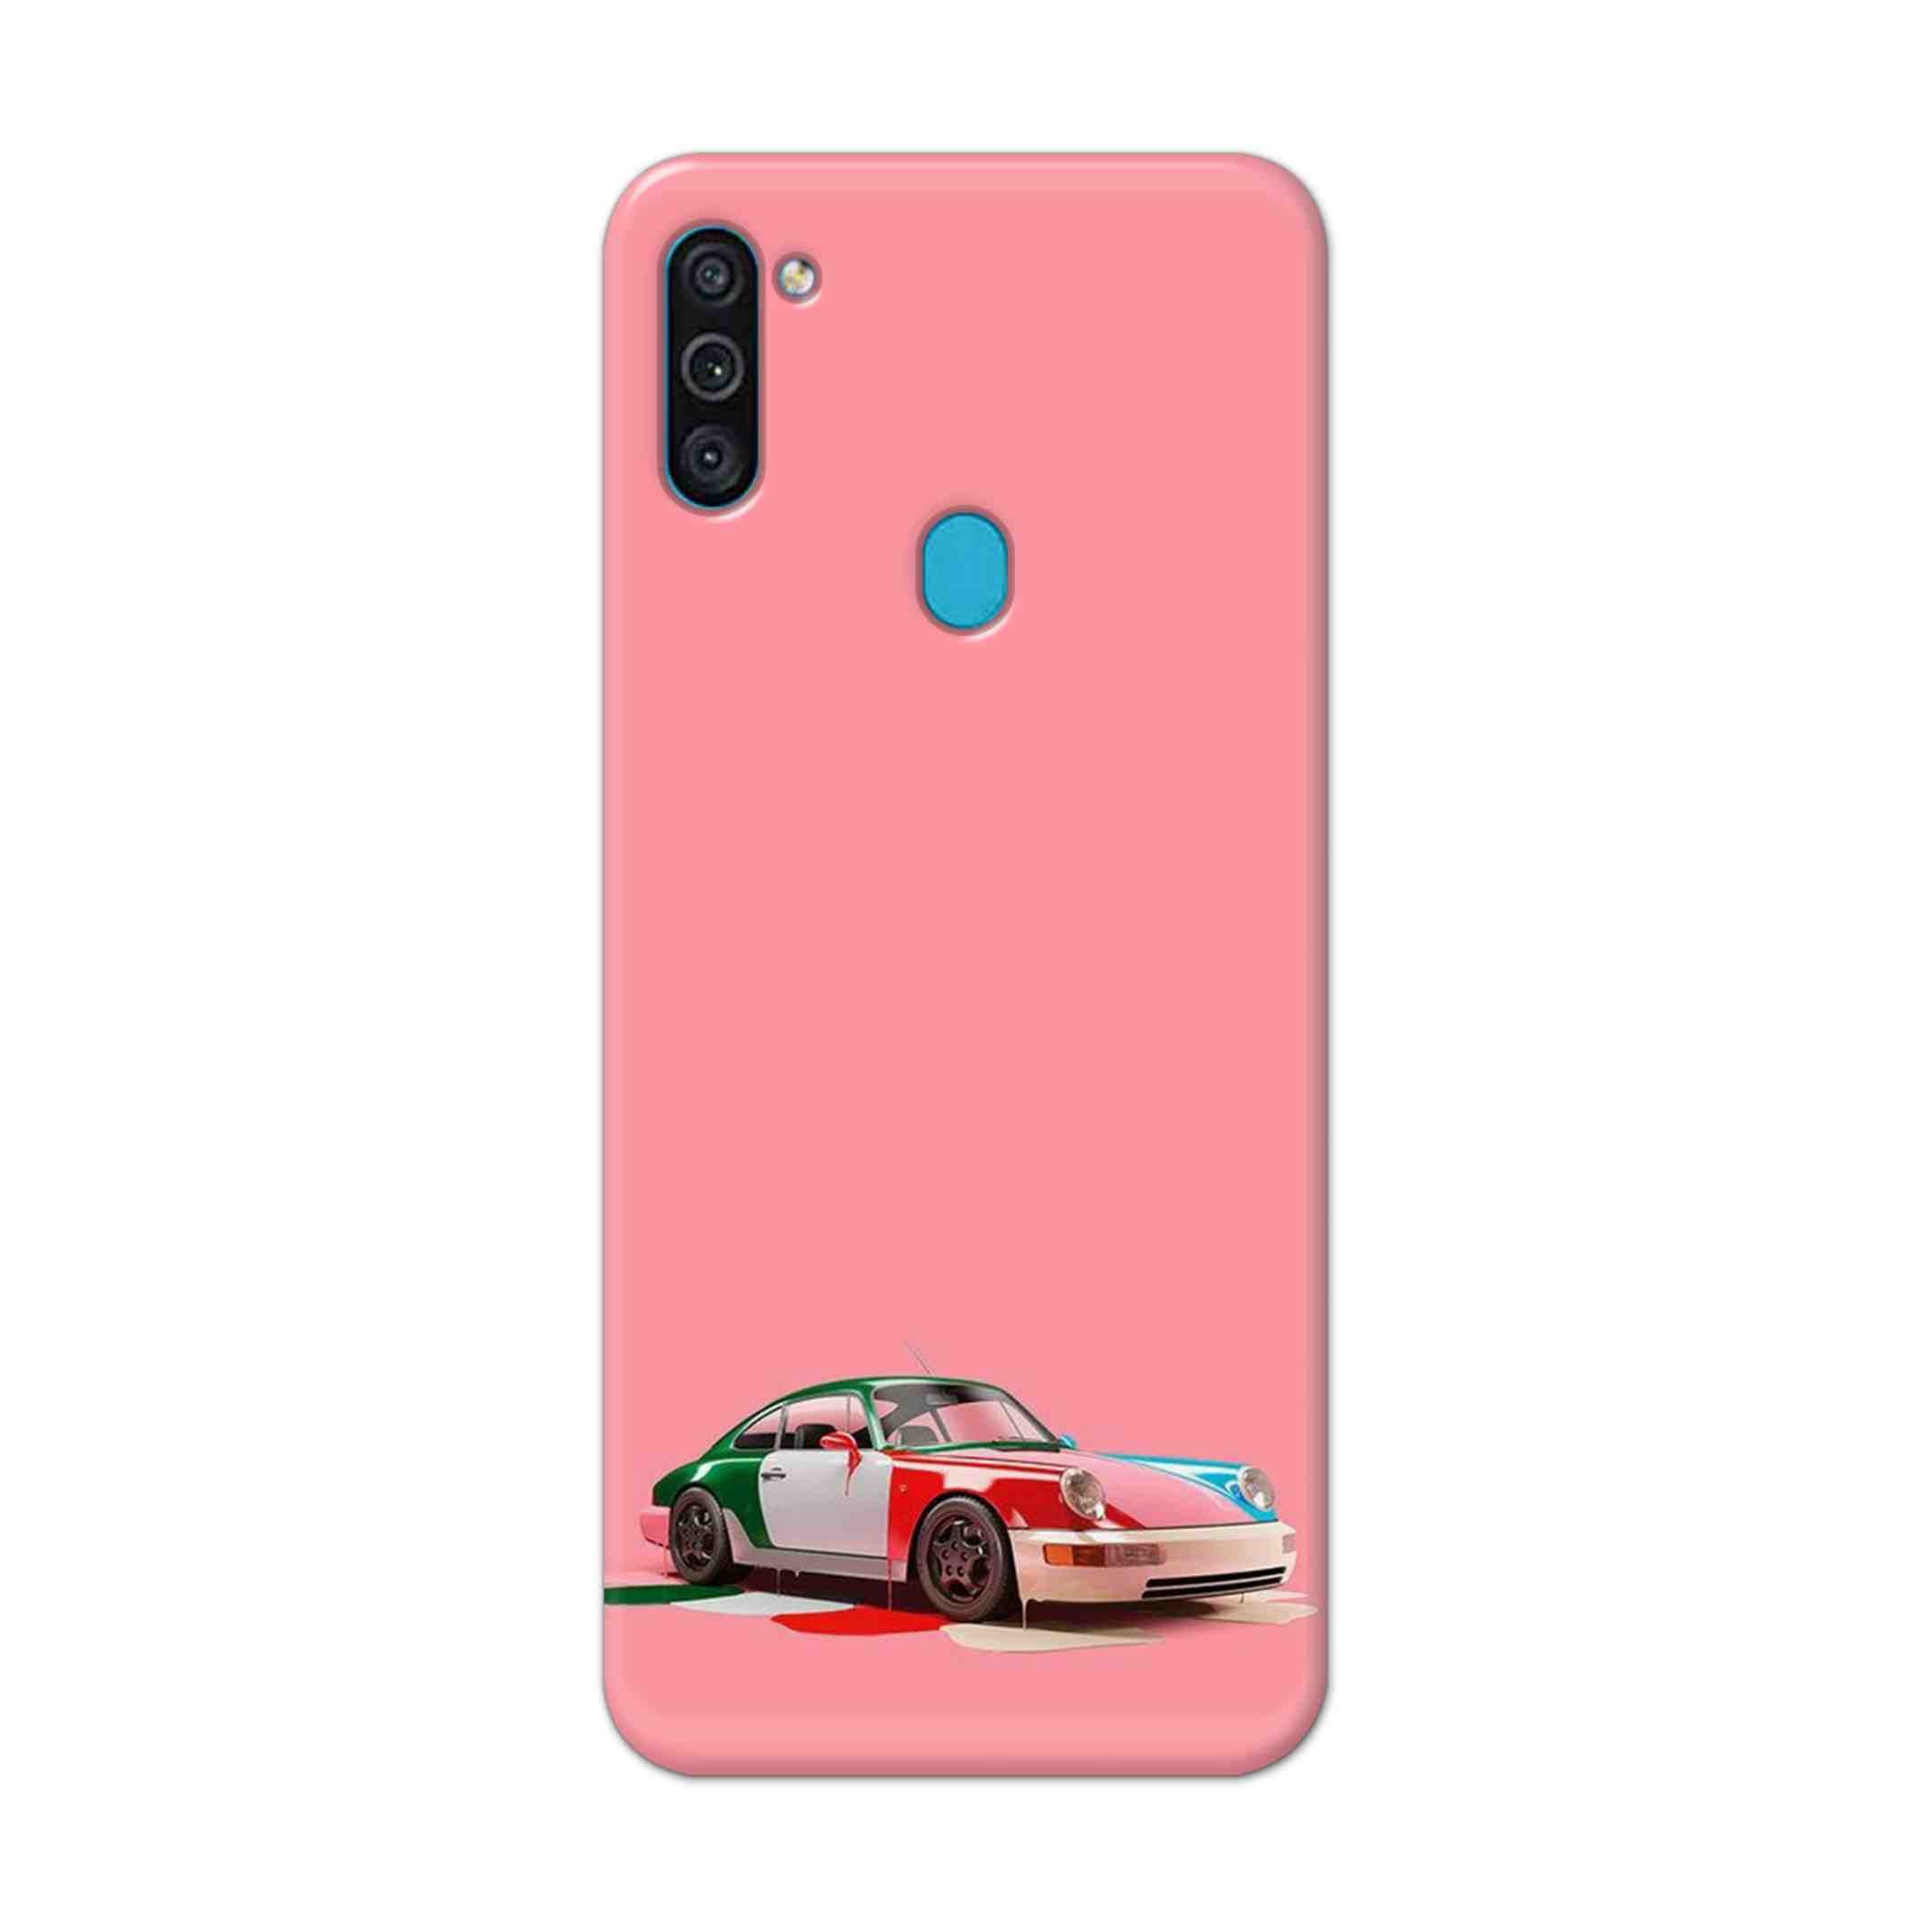 Buy Pink Porche Hard Back Mobile Phone Case Cover For Samsung Galaxy M11 Online